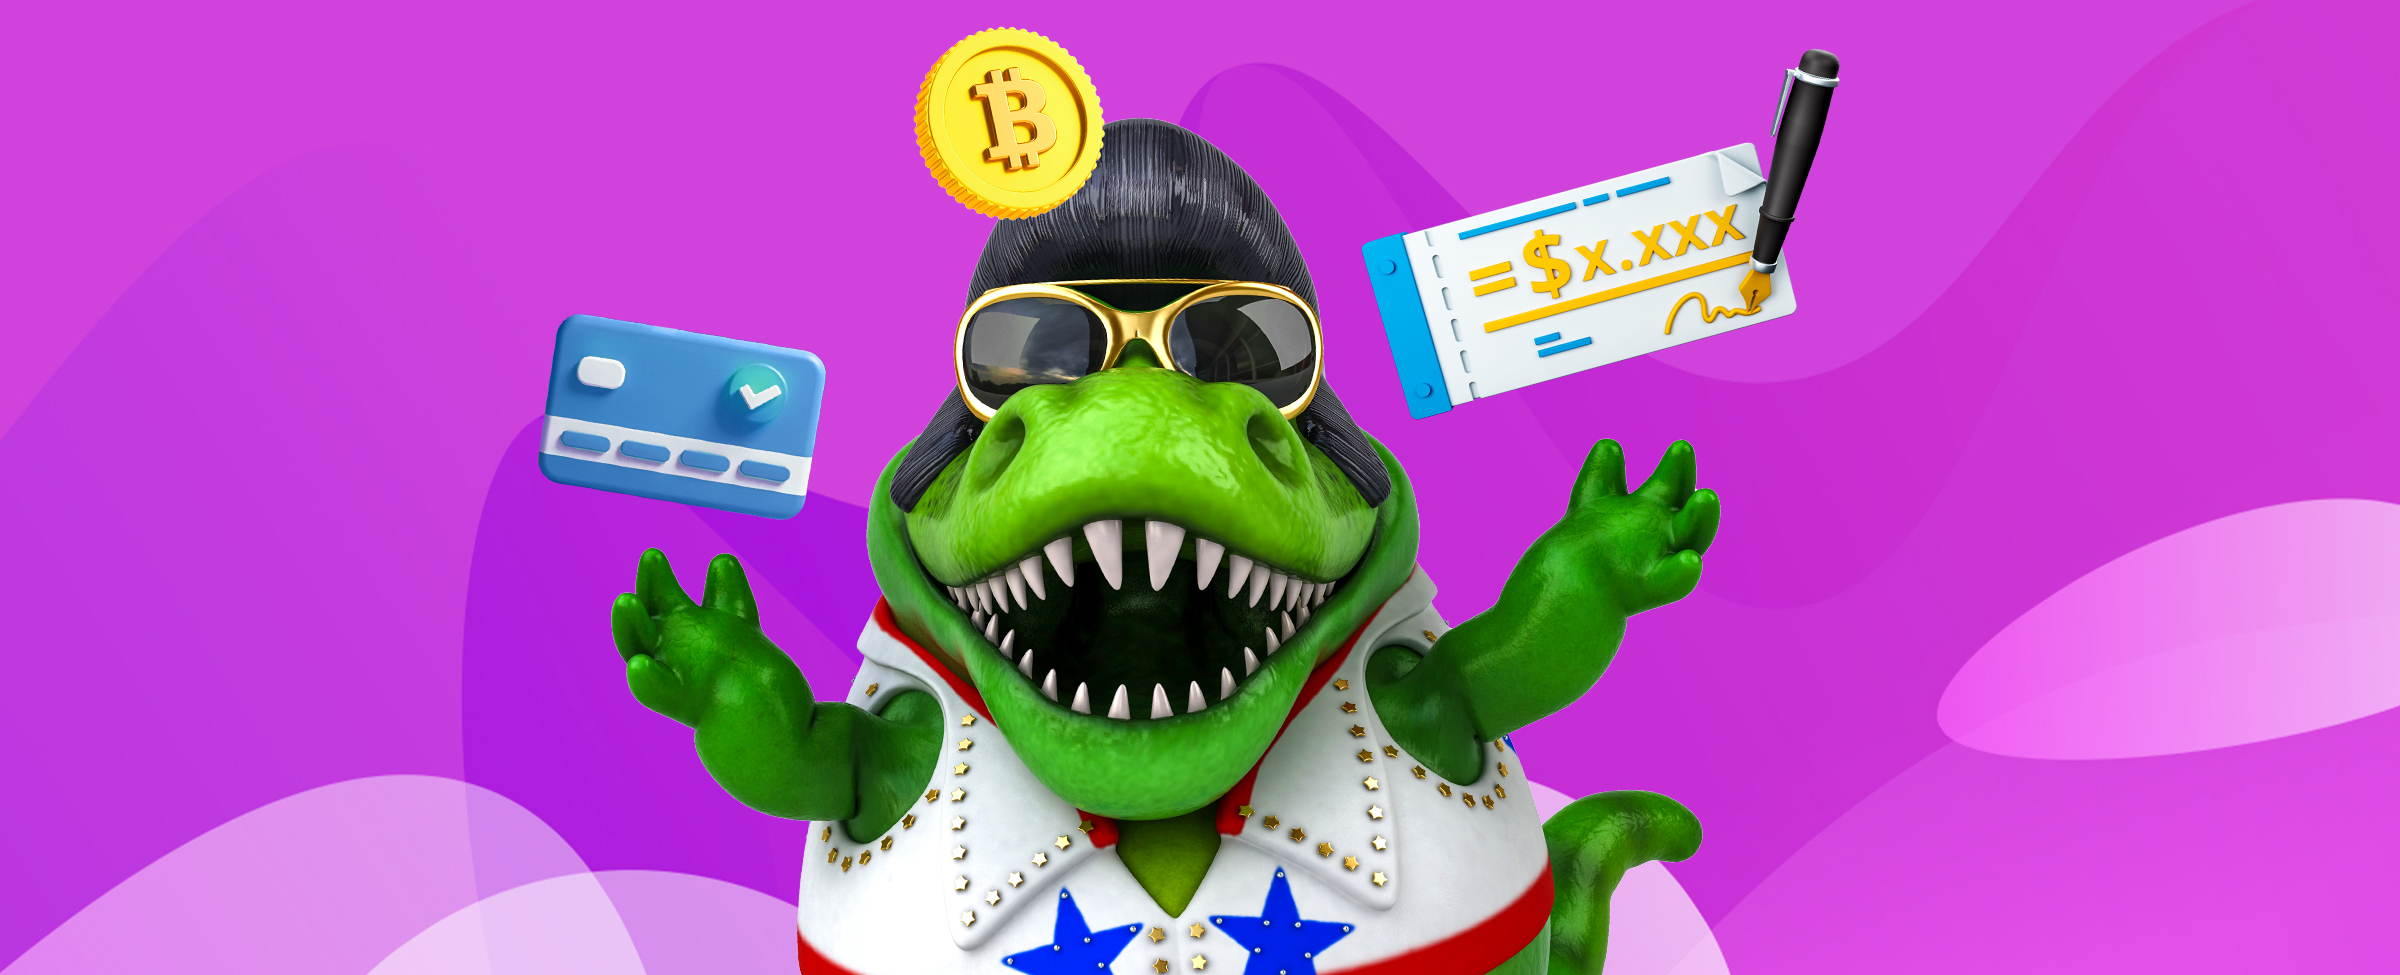 A cartoon character of a crocodile dressed as Elvis, wearing sunglasses and juggling a bitcoin, a crypto wallet and a check with a pen